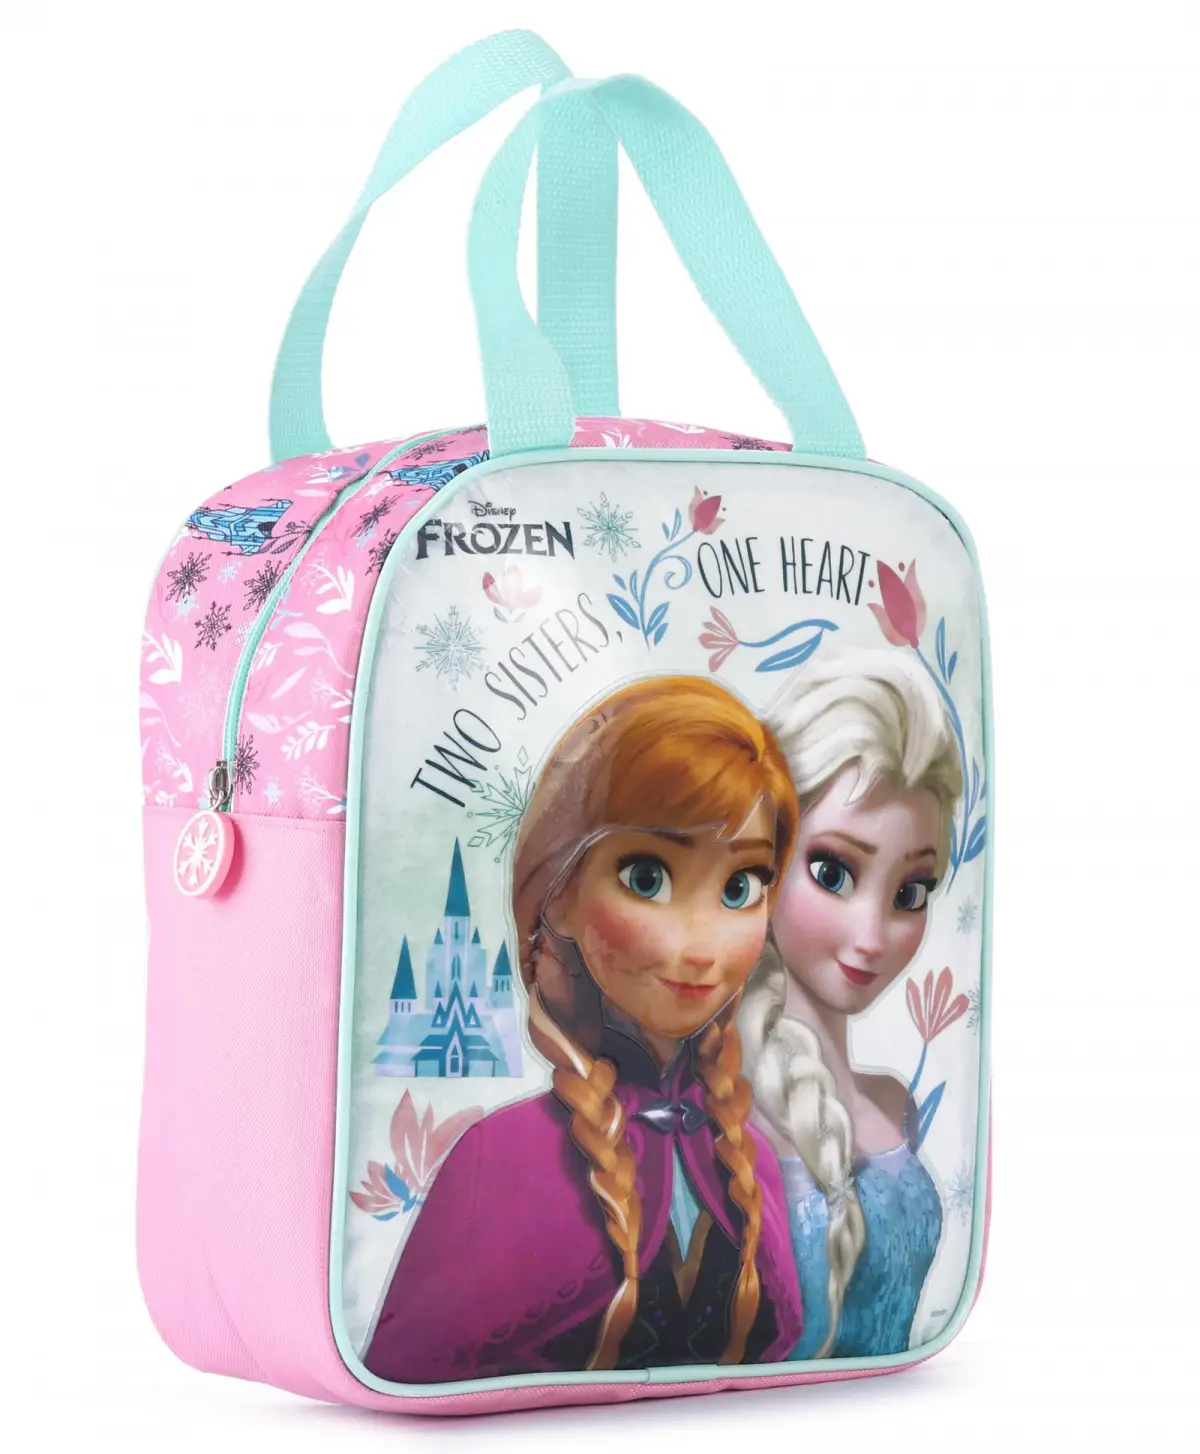 Striders Premium Frozen Lunch Bag with Insulation Technology, 3Y+, Multicolour